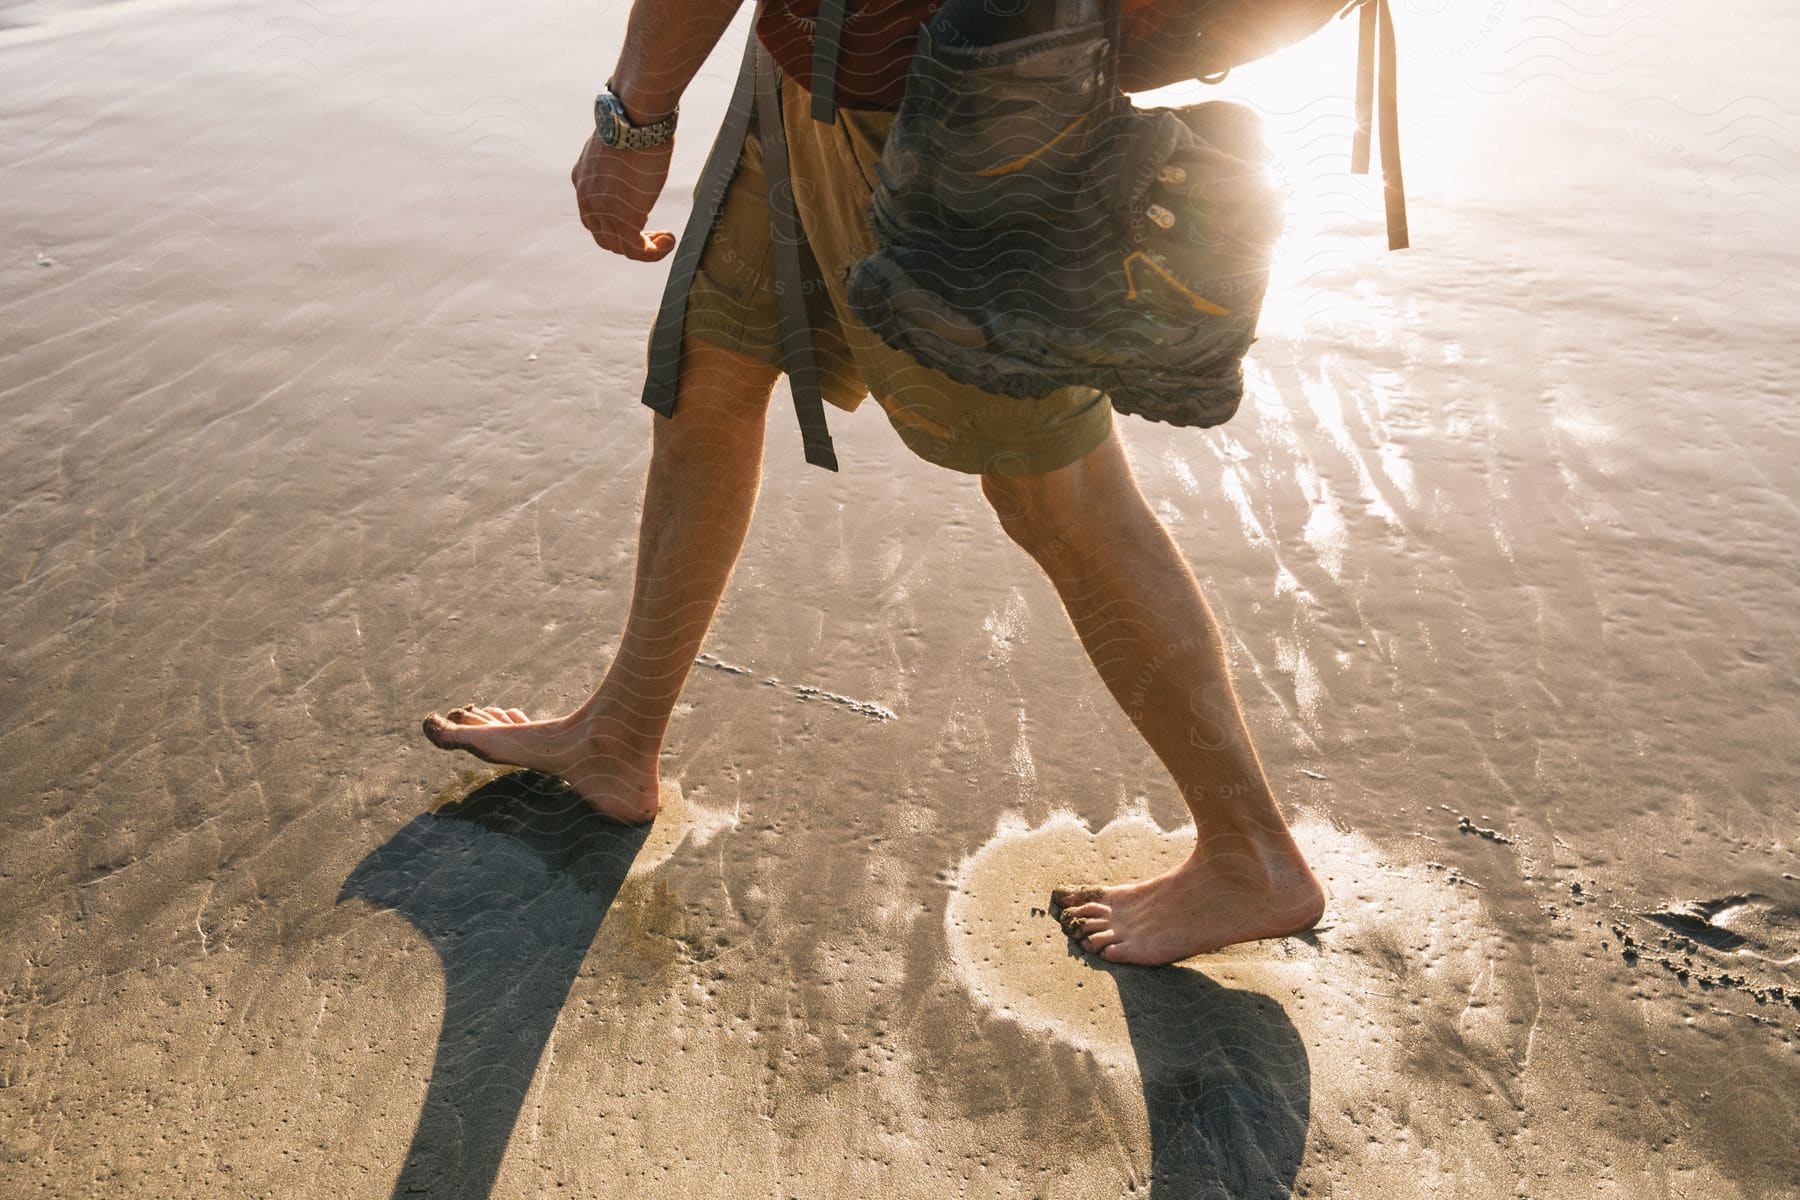 A man with hiking boots attached to his side walks barefoot on a beach at dusk or dawn